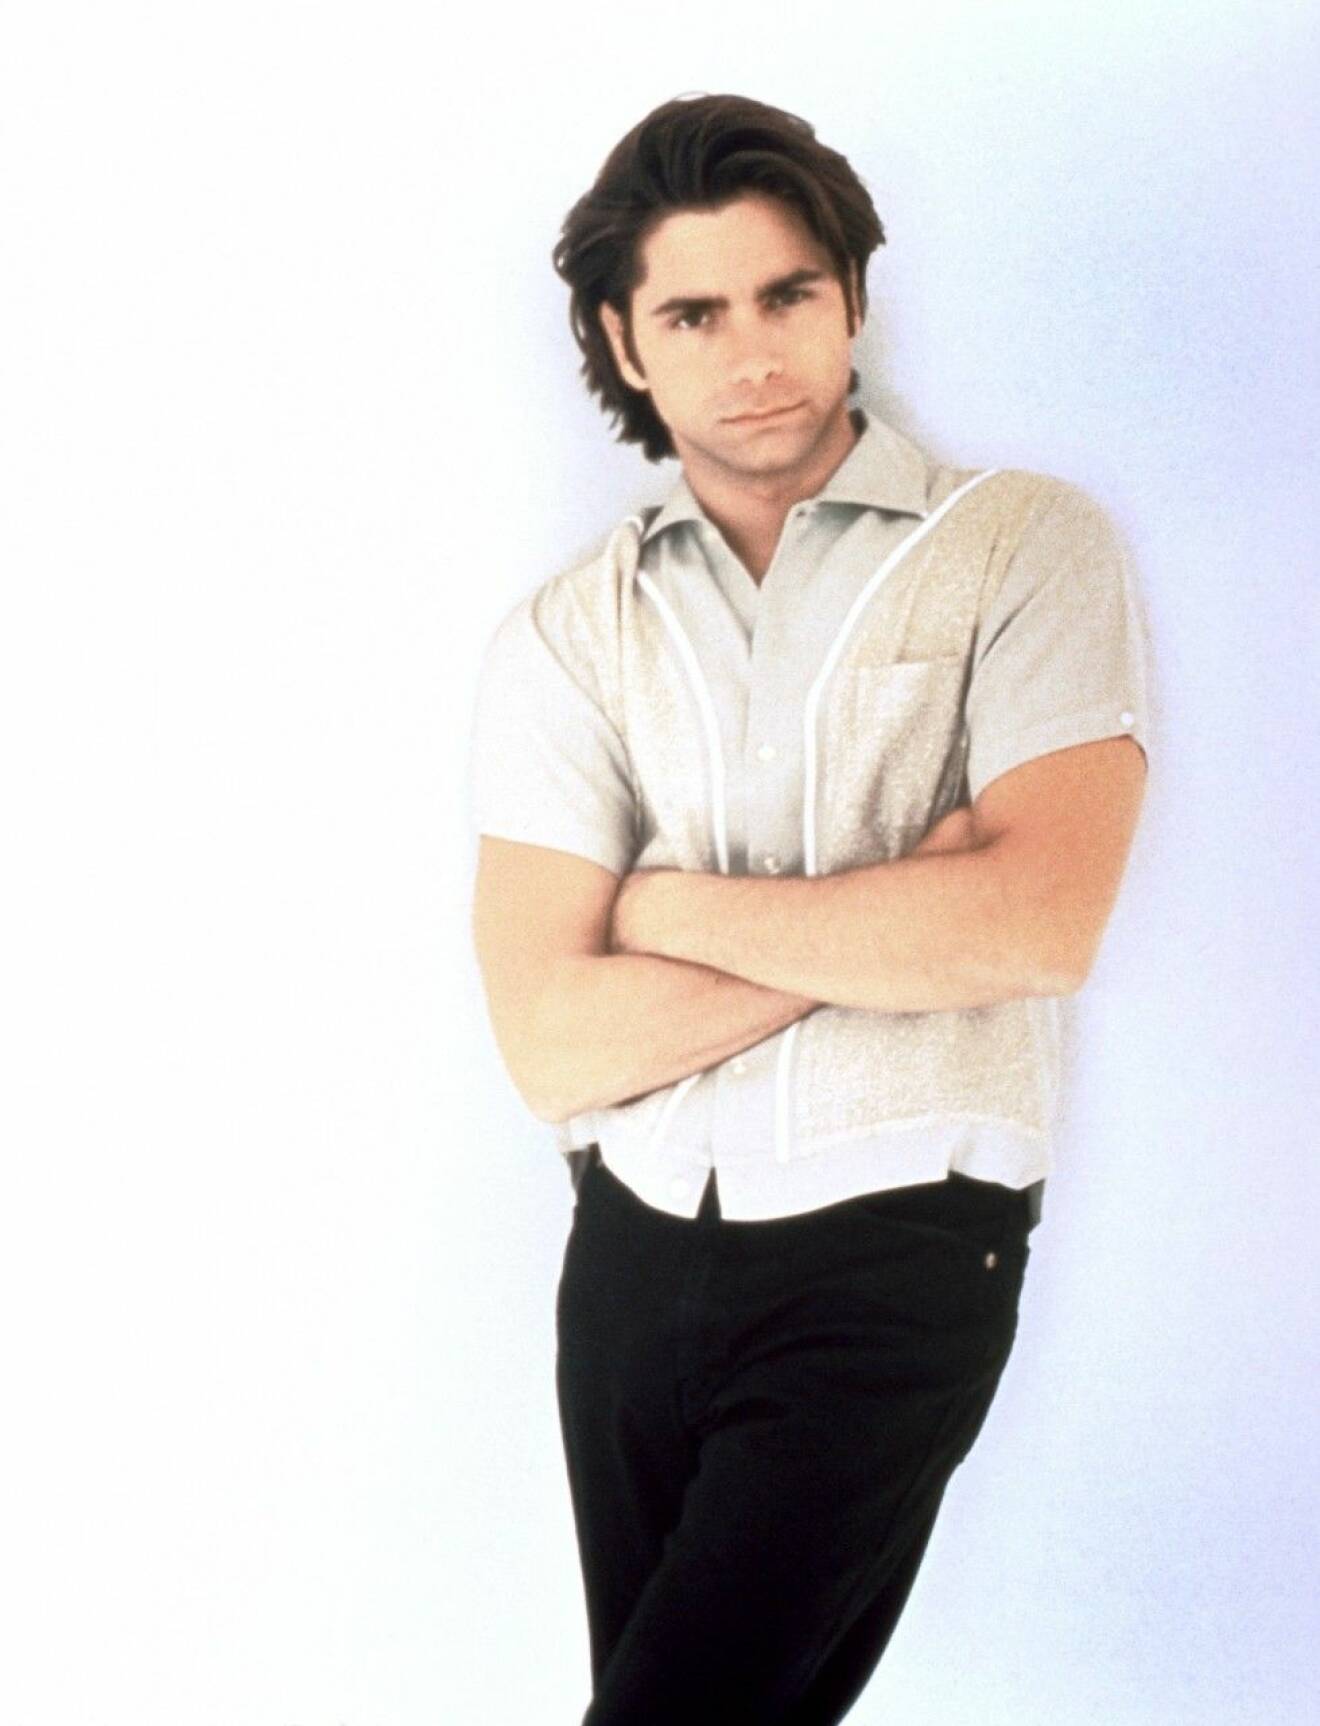 FULL HOUSE, John Stamos, (1990s), 1987-95. © Warner Brothers / Courtesy: Everett Collection.